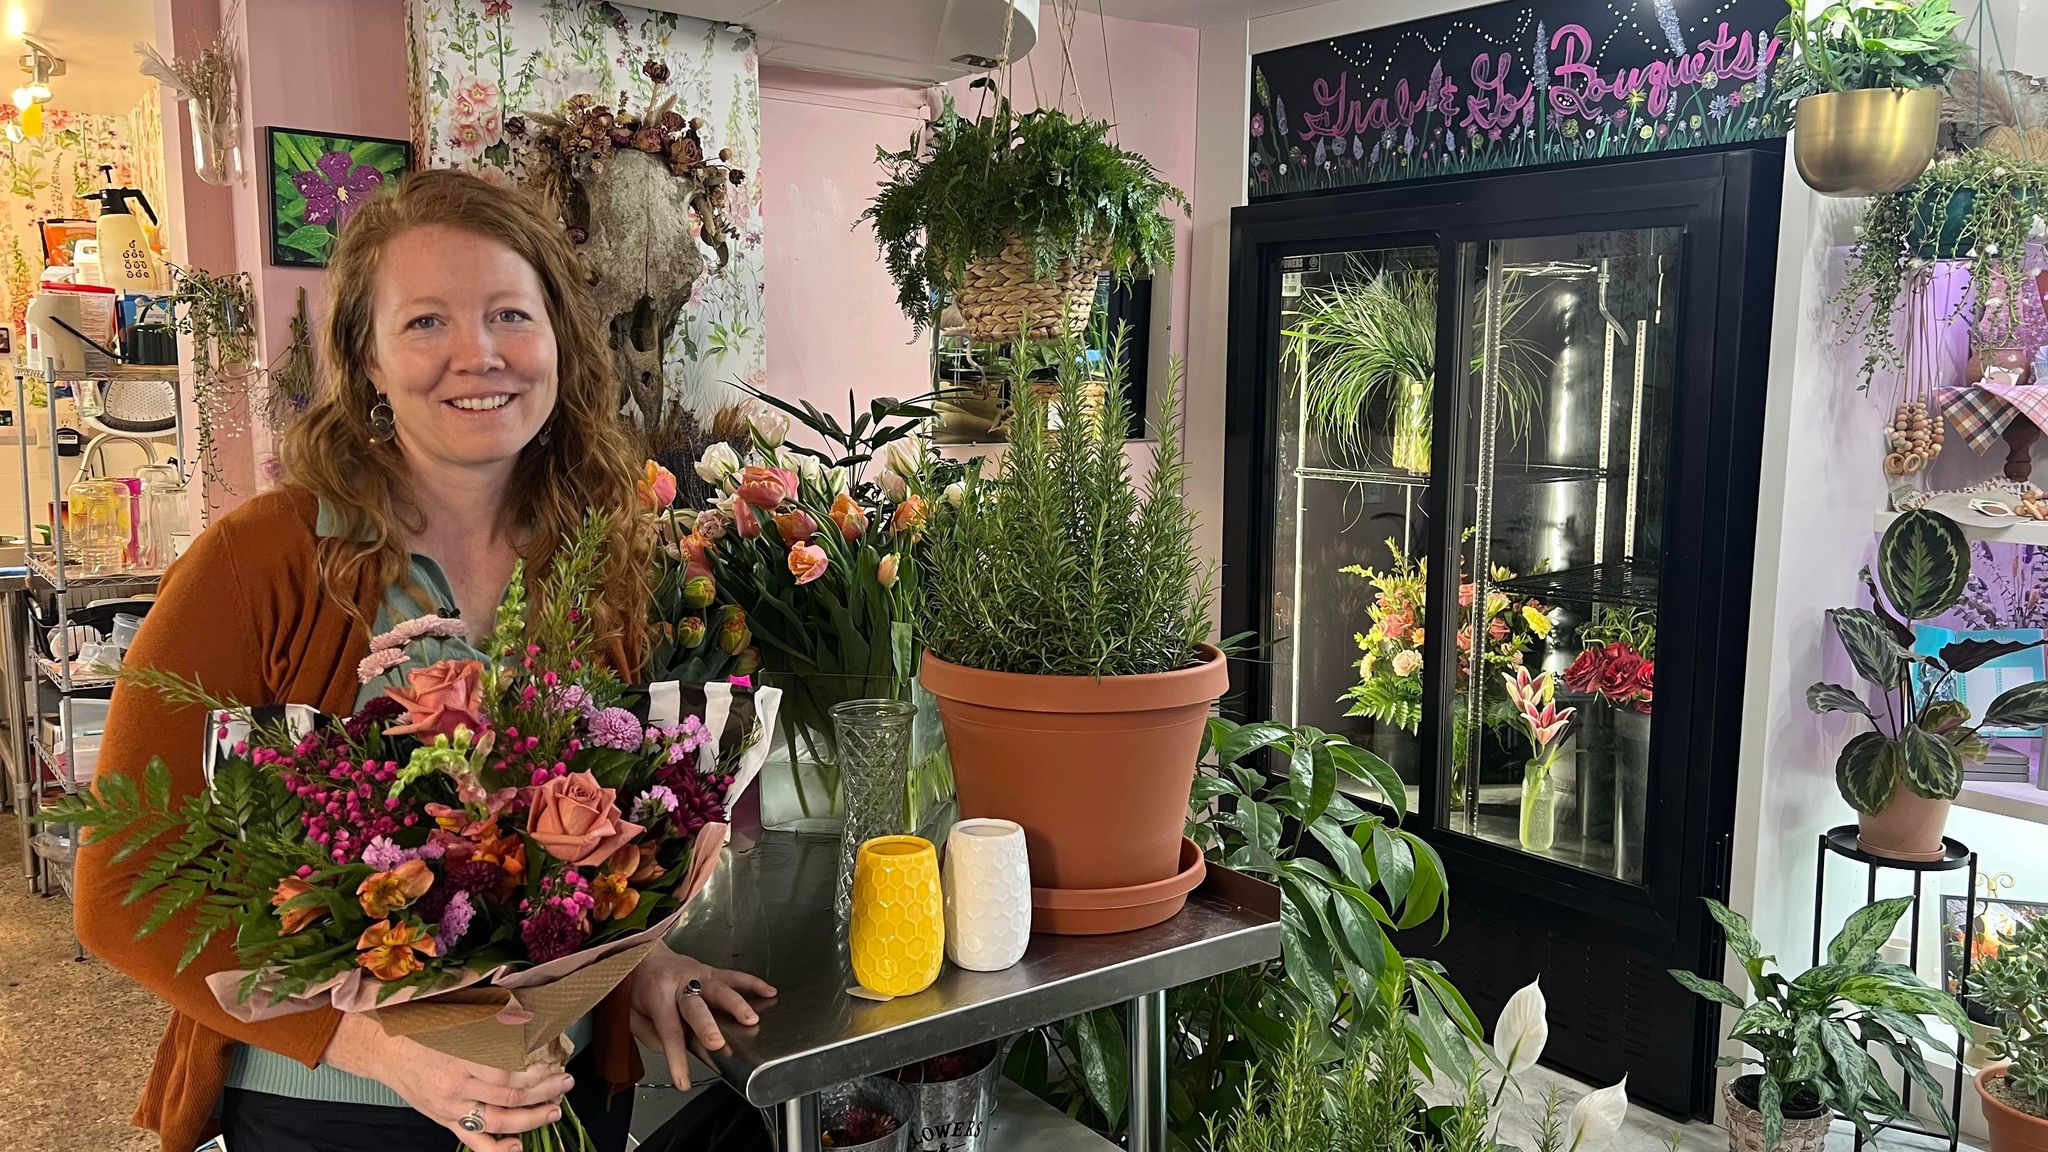 WEDNESDAY, OCTOBER 21, 2020 Ad - Dandelion Floral & Gifts - Kanabec County  Times